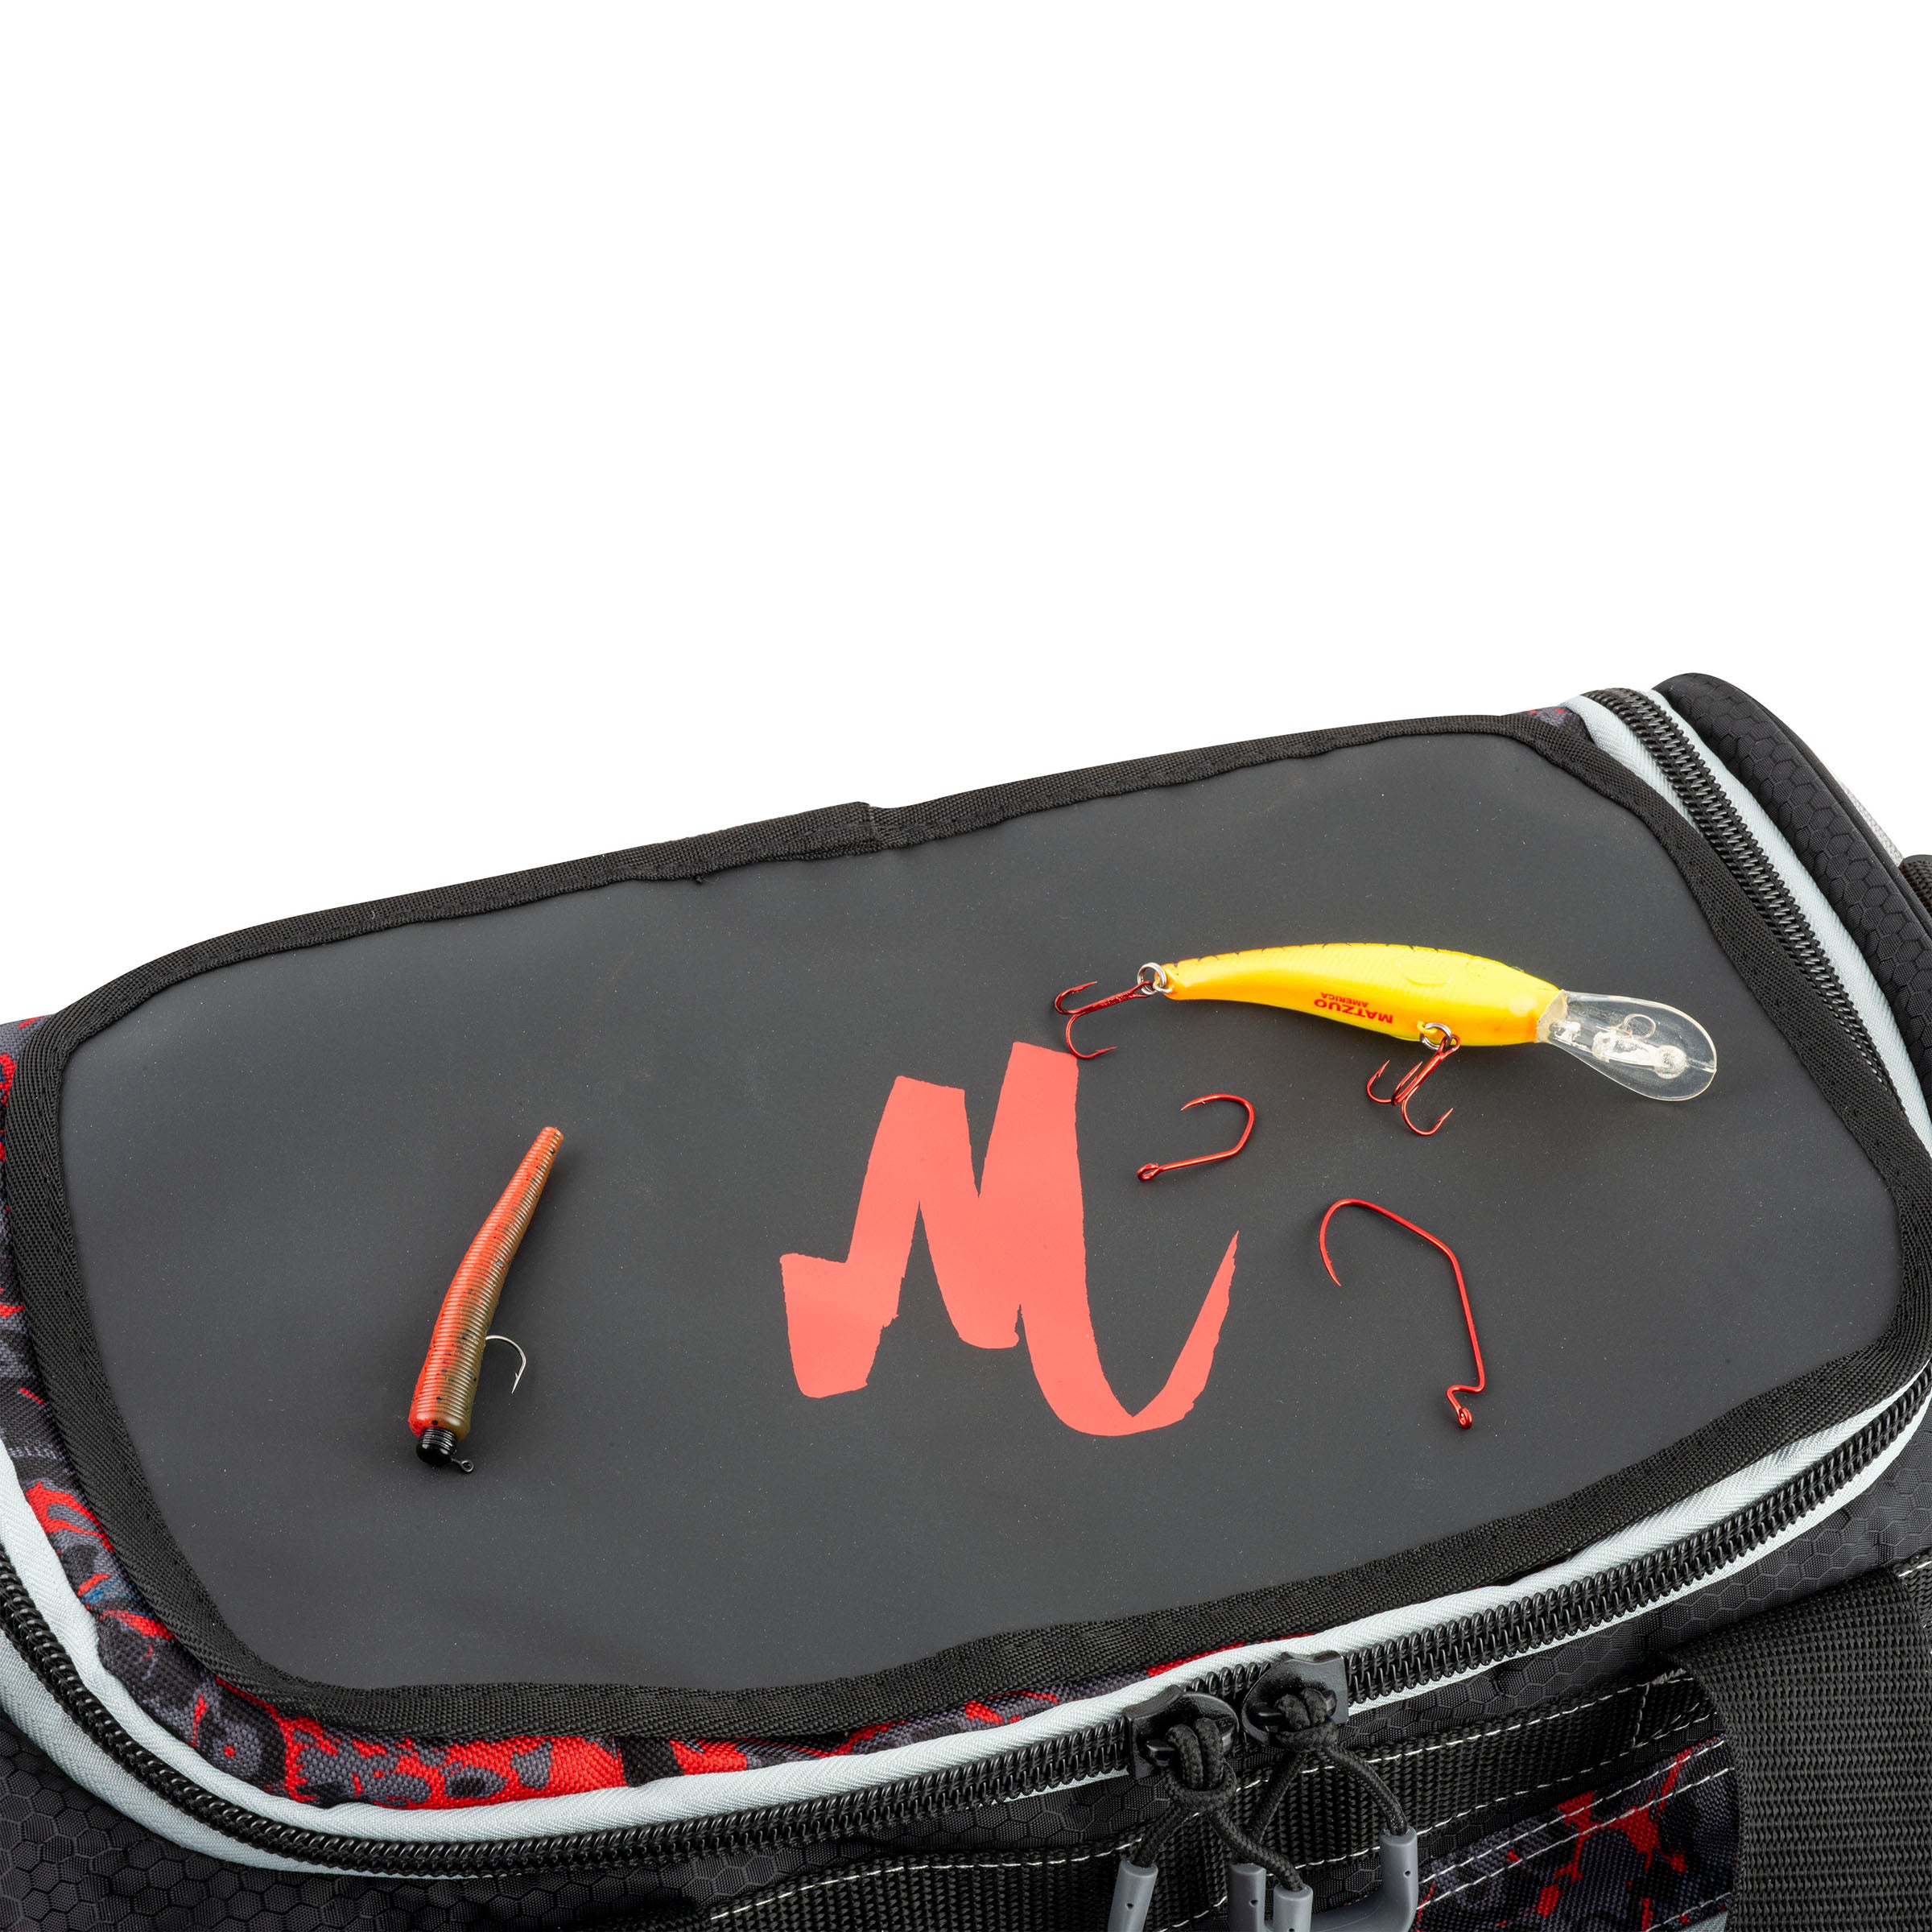 Calcutta Squall Soft Sided Tackle Bag with 4 Trays – Tackle Room